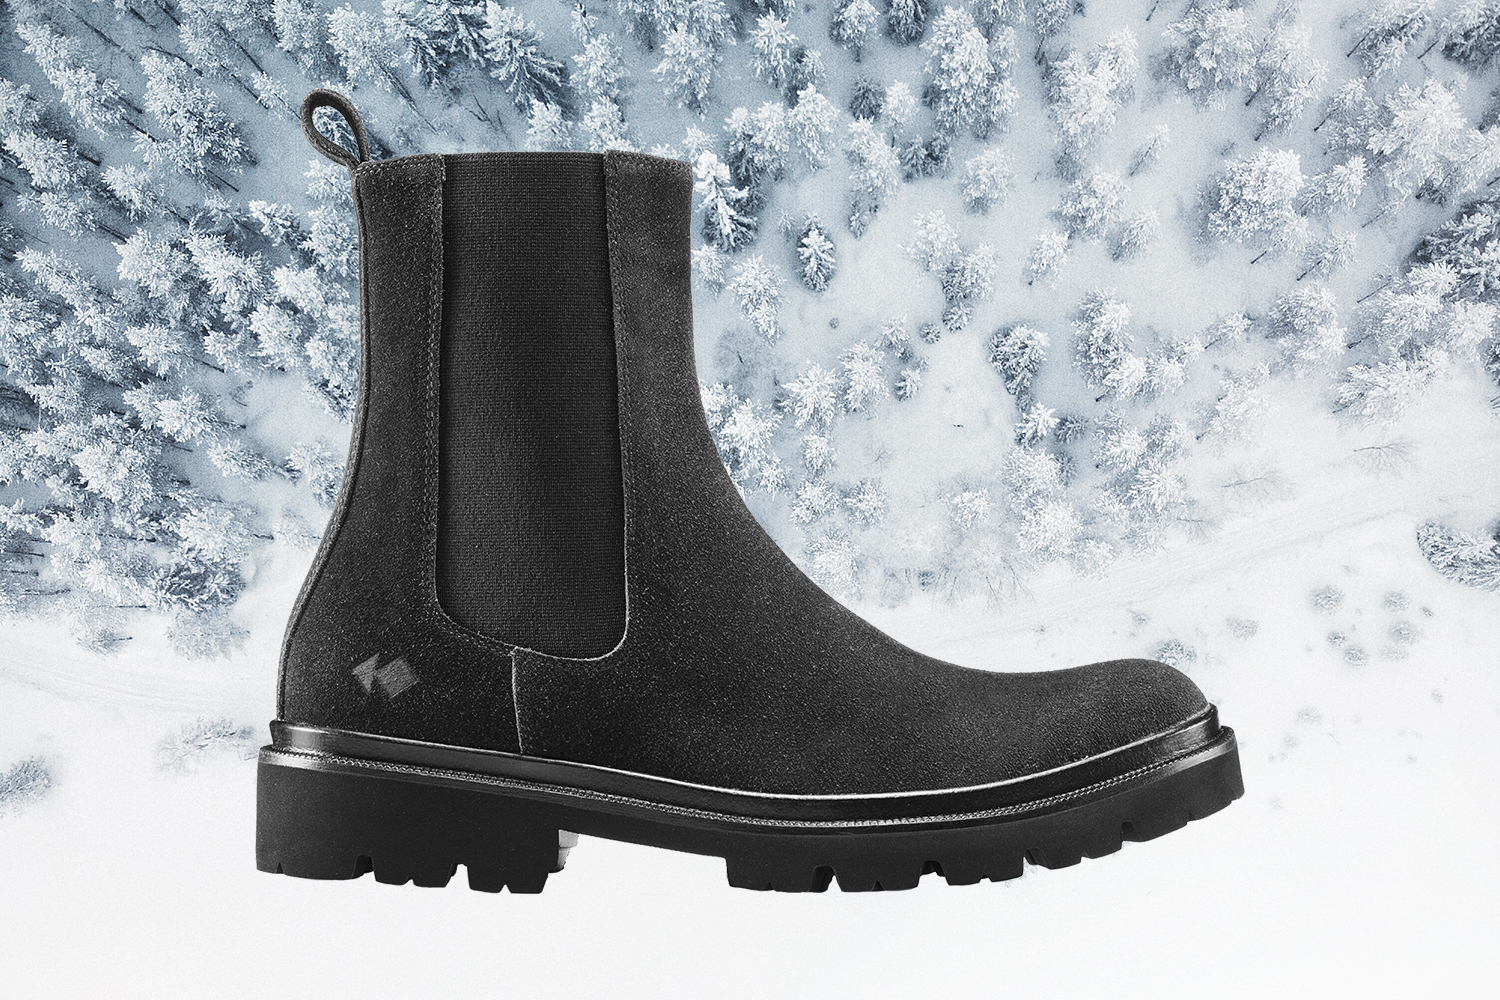 Koio Releases a Men's Winter Boot 